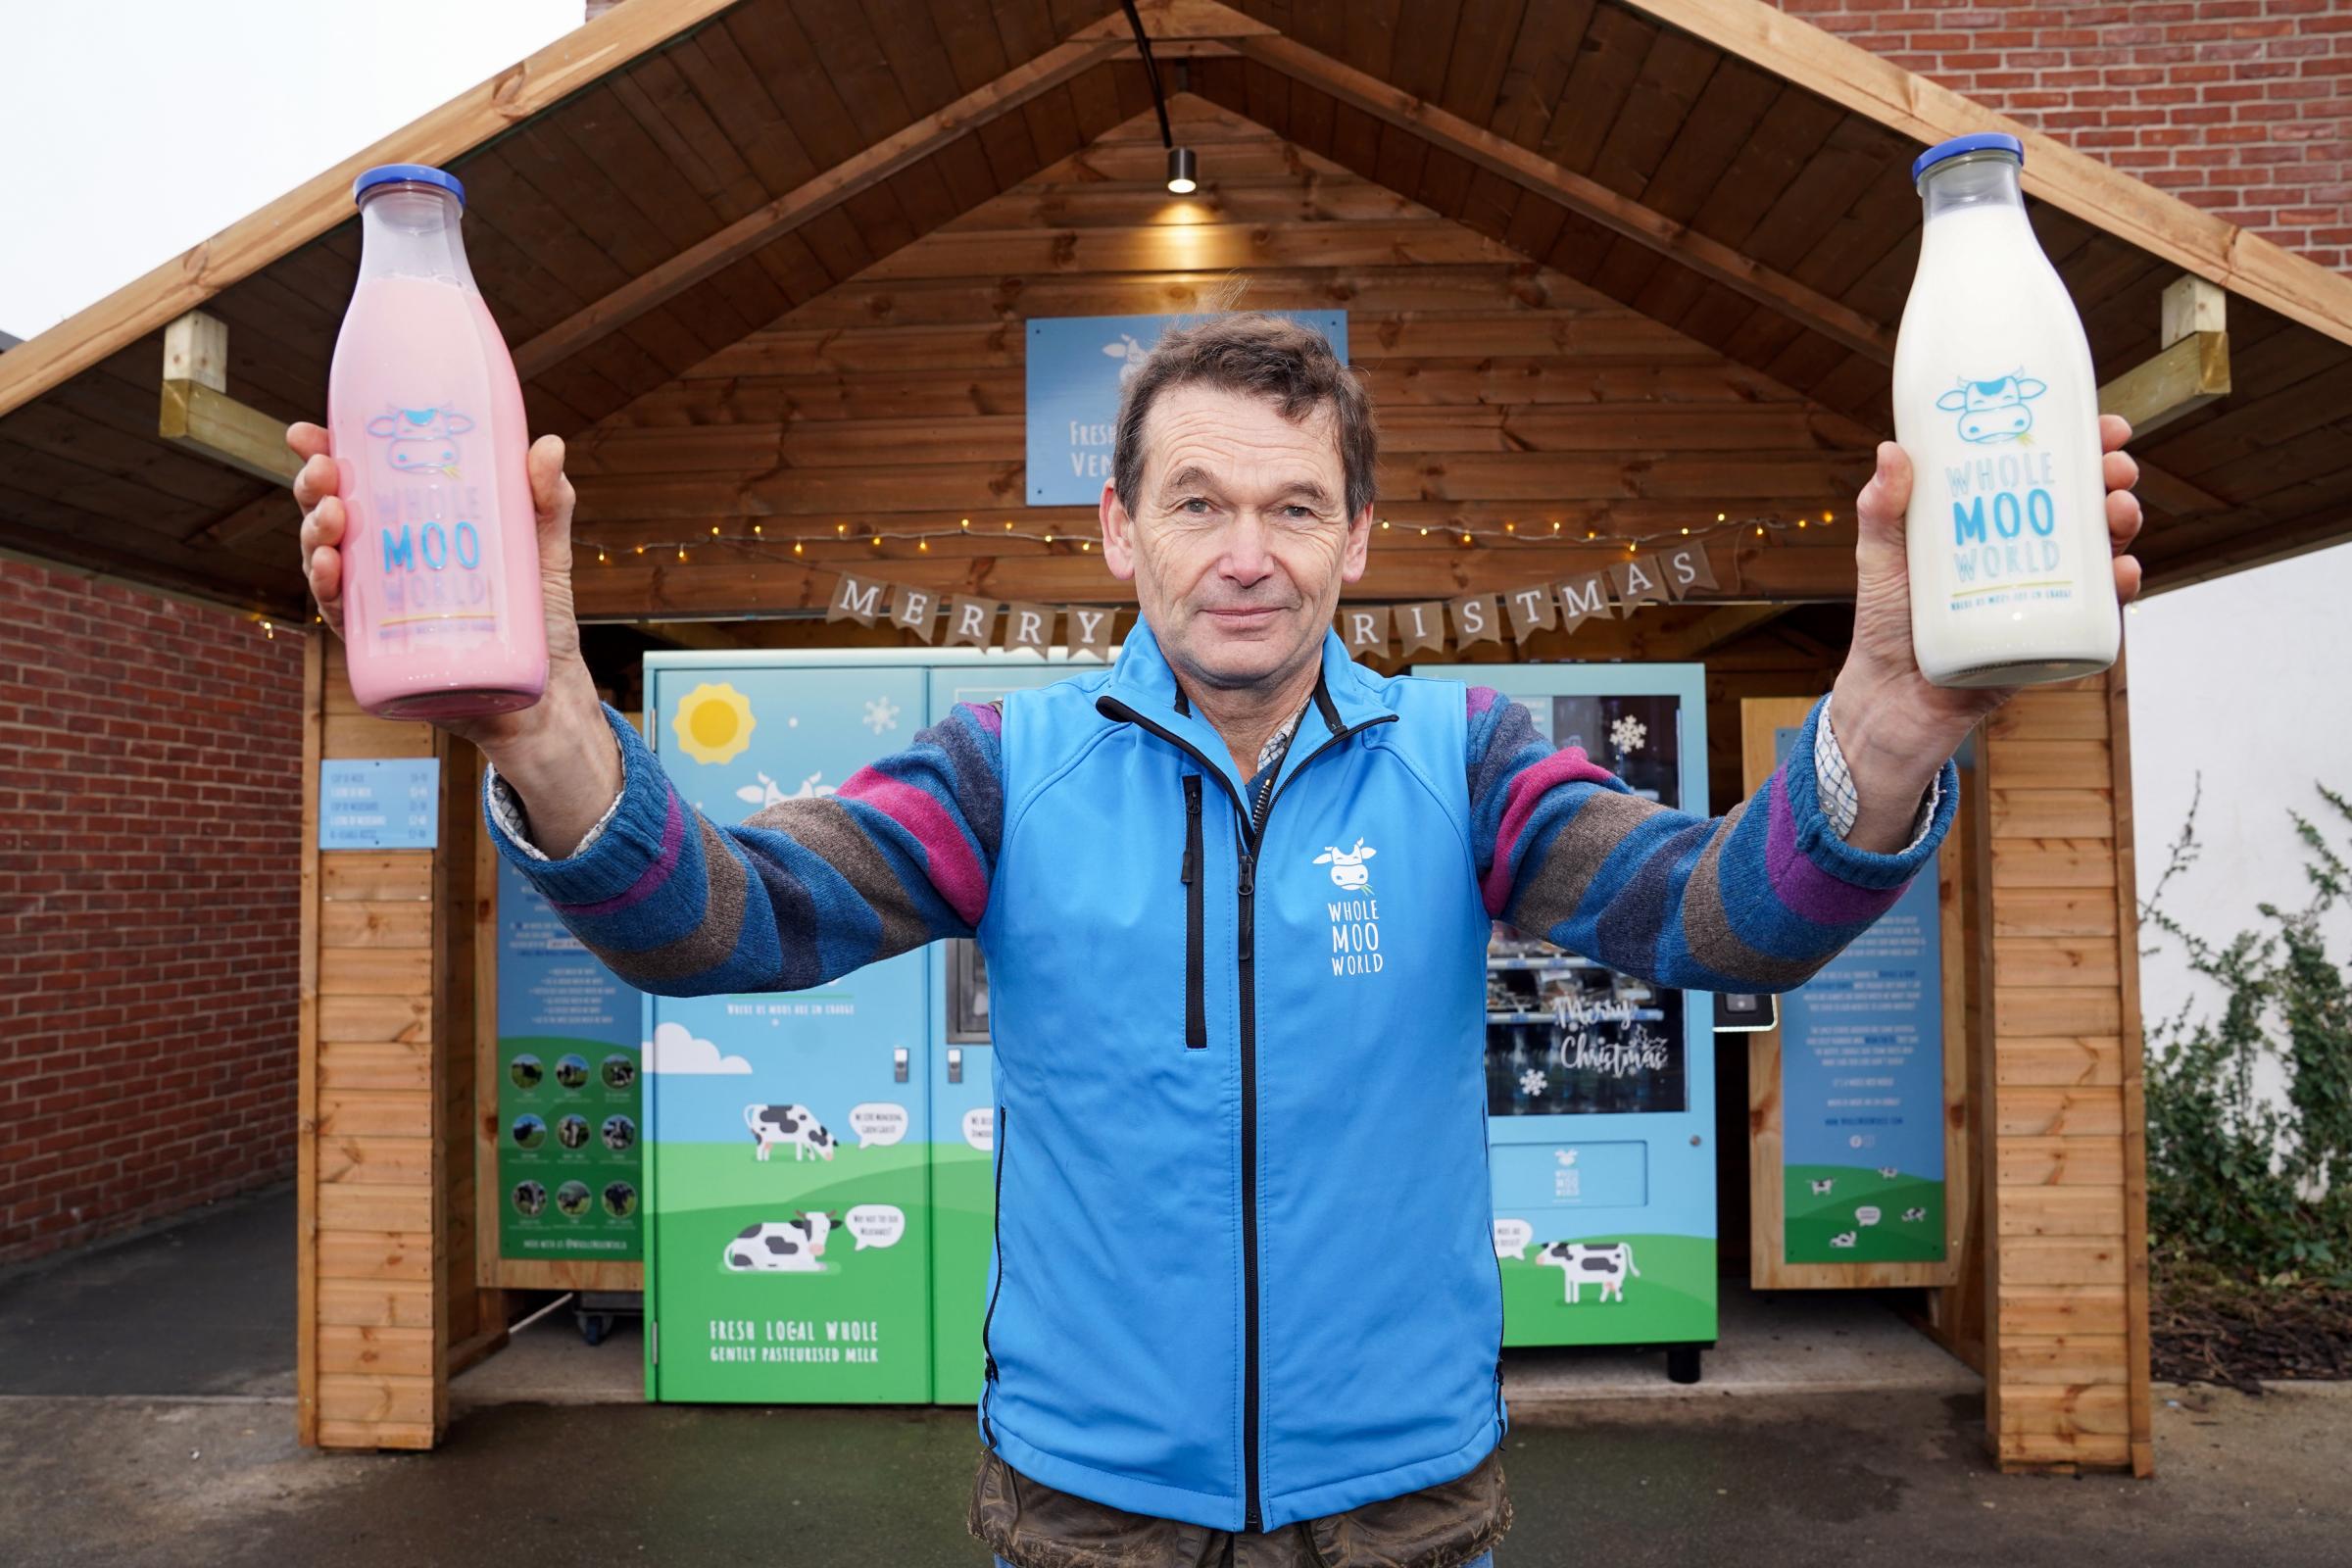 Proud owner, Mark James at the new Whole Moo World milk vending machine at the Old Market in Hereford.